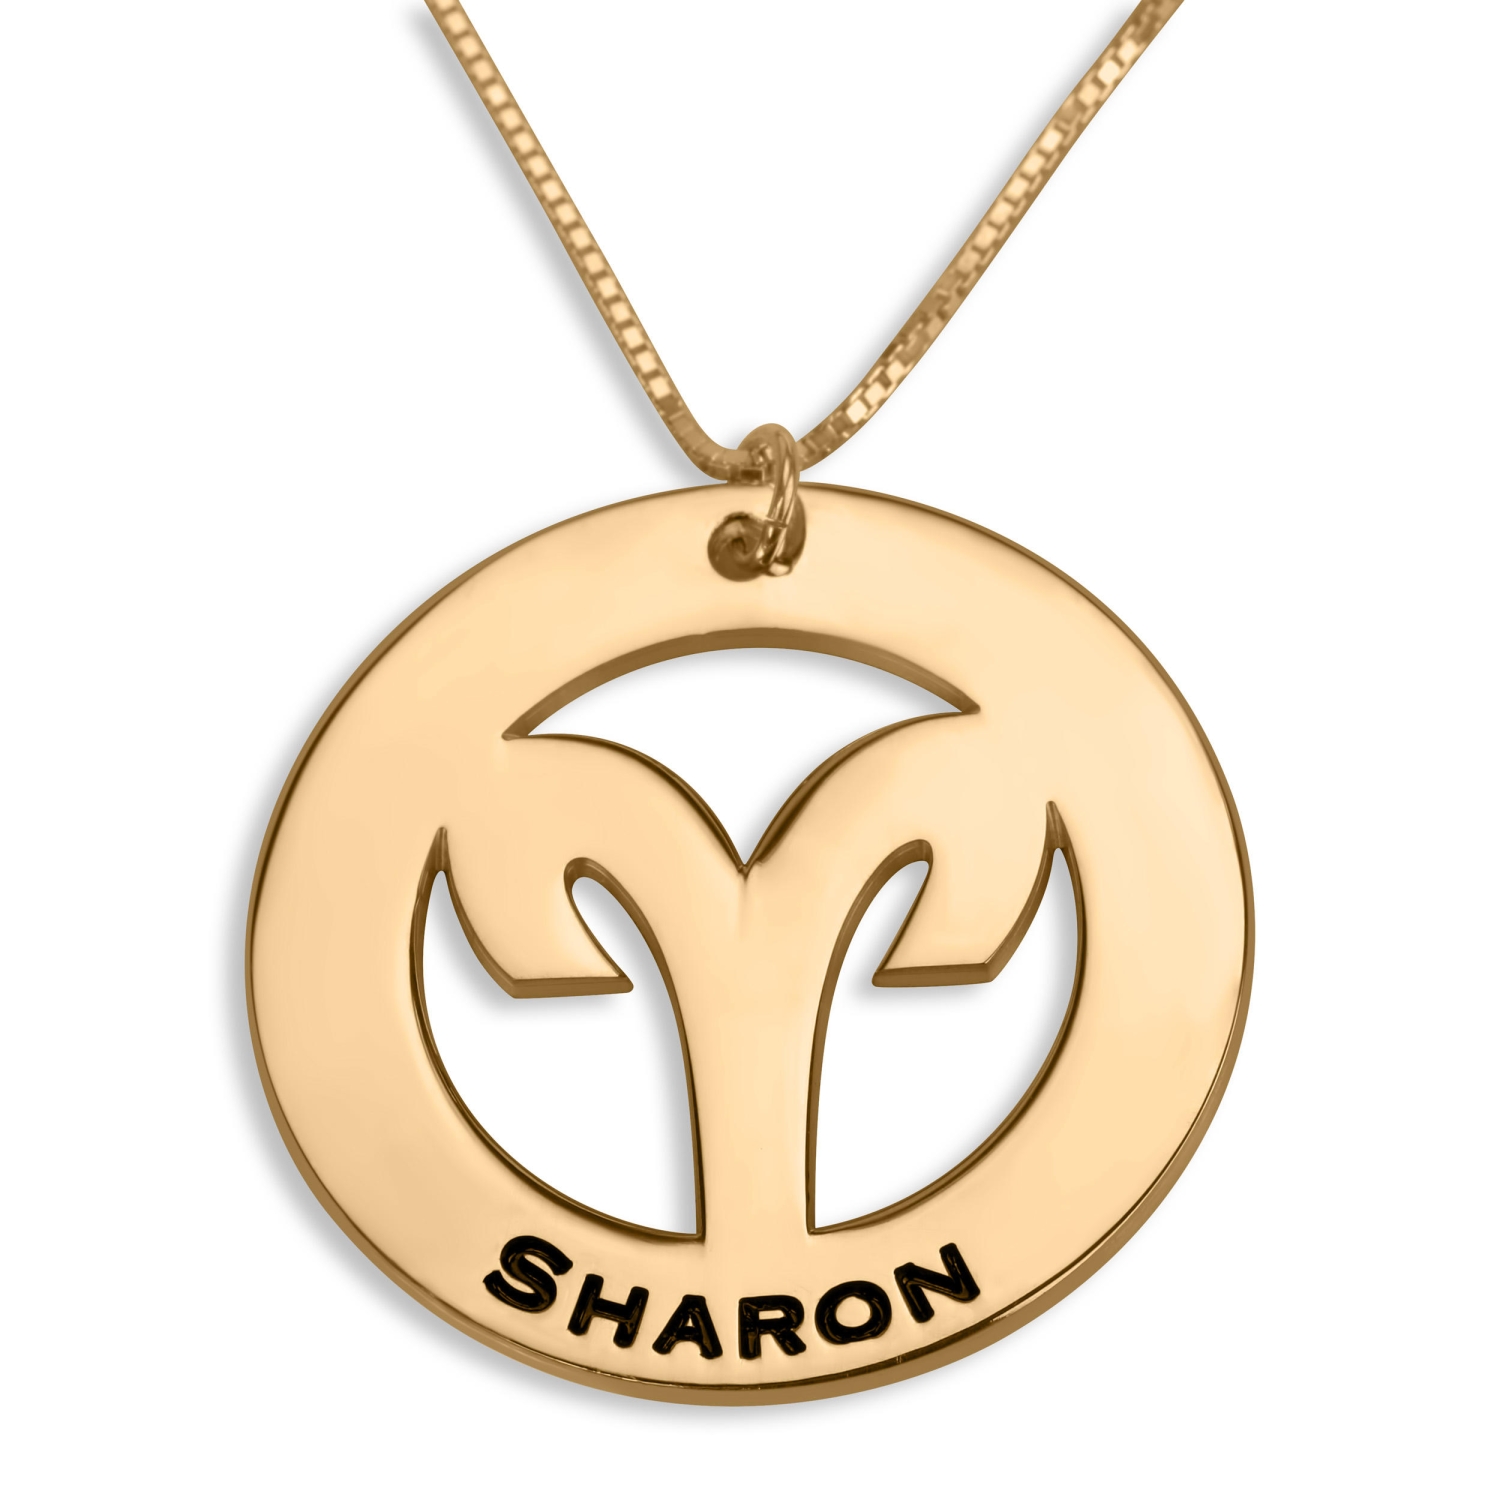 Aries Sign Name Necklace, 24K Gold Plated - 1